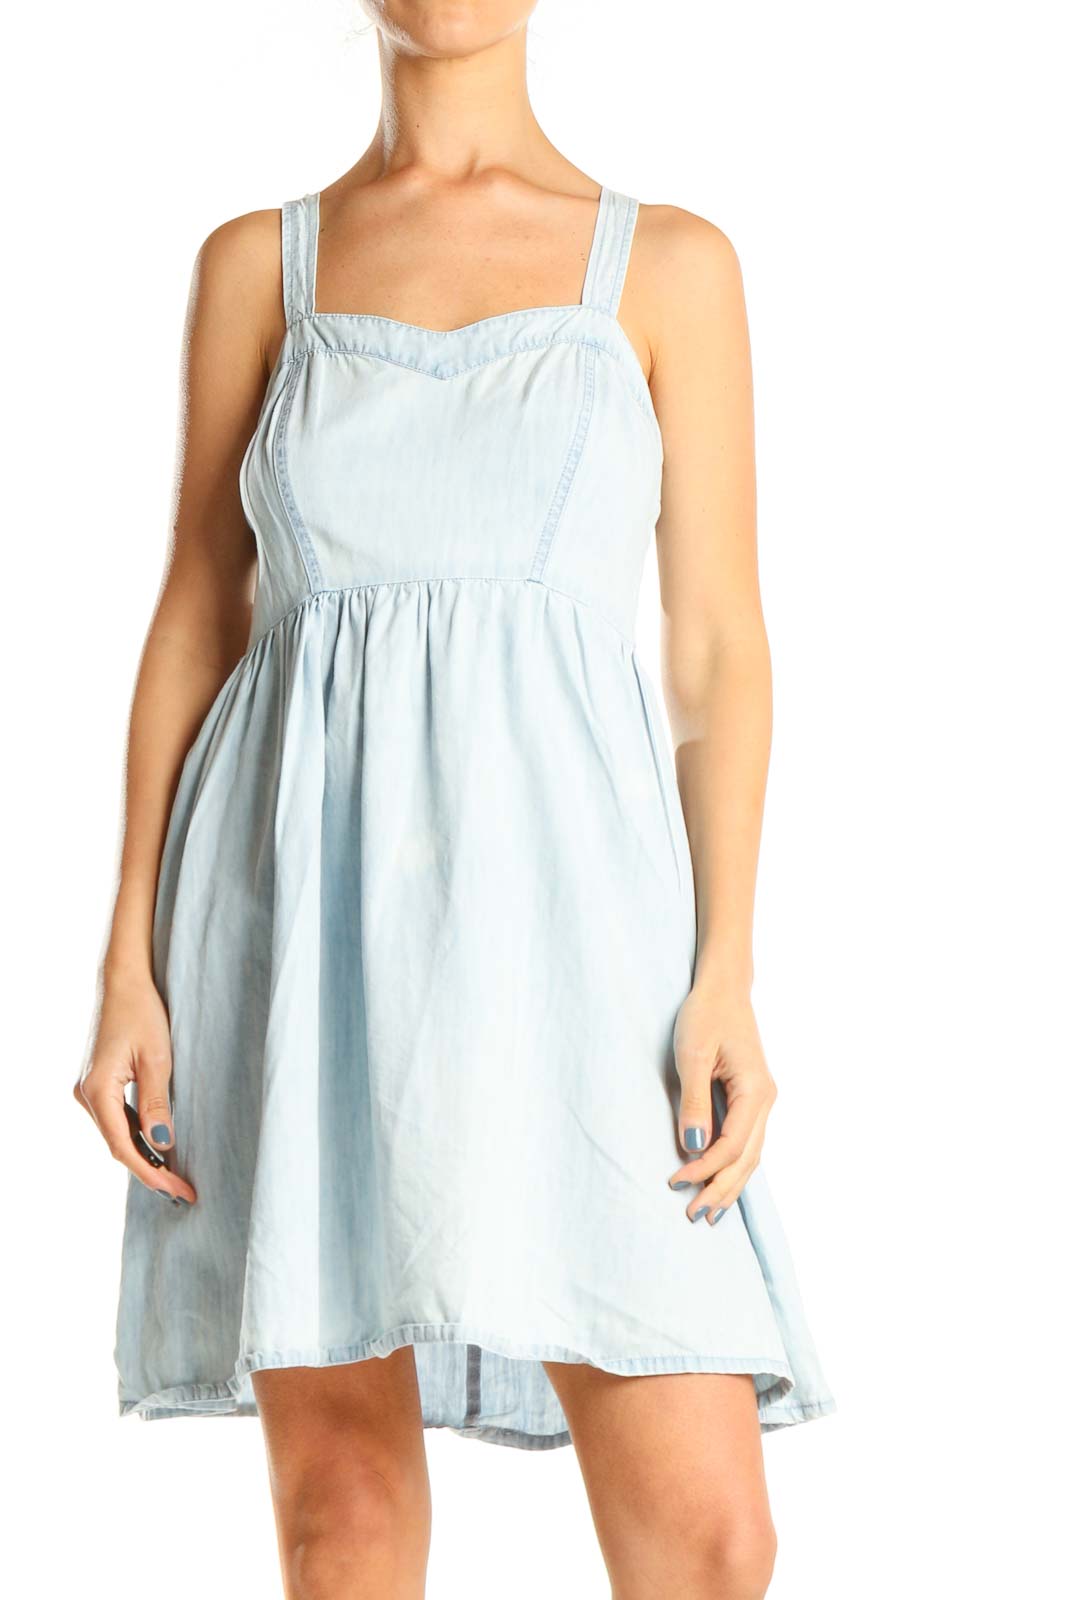 Blue Denim Casual Fit & Flare Dress Front